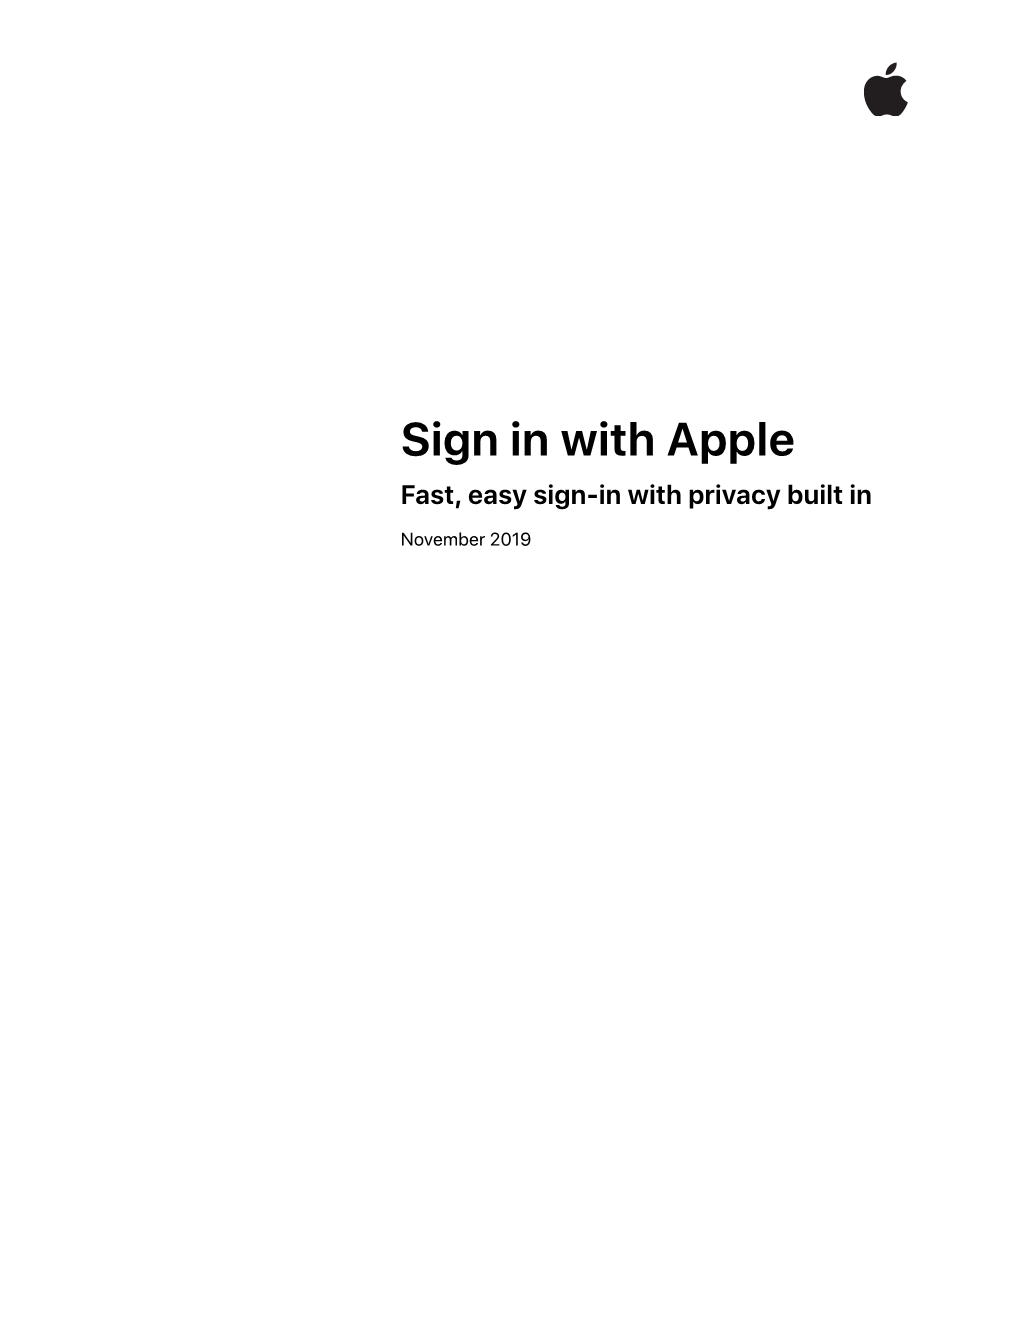 View the Sign in with Apple Tech Brief